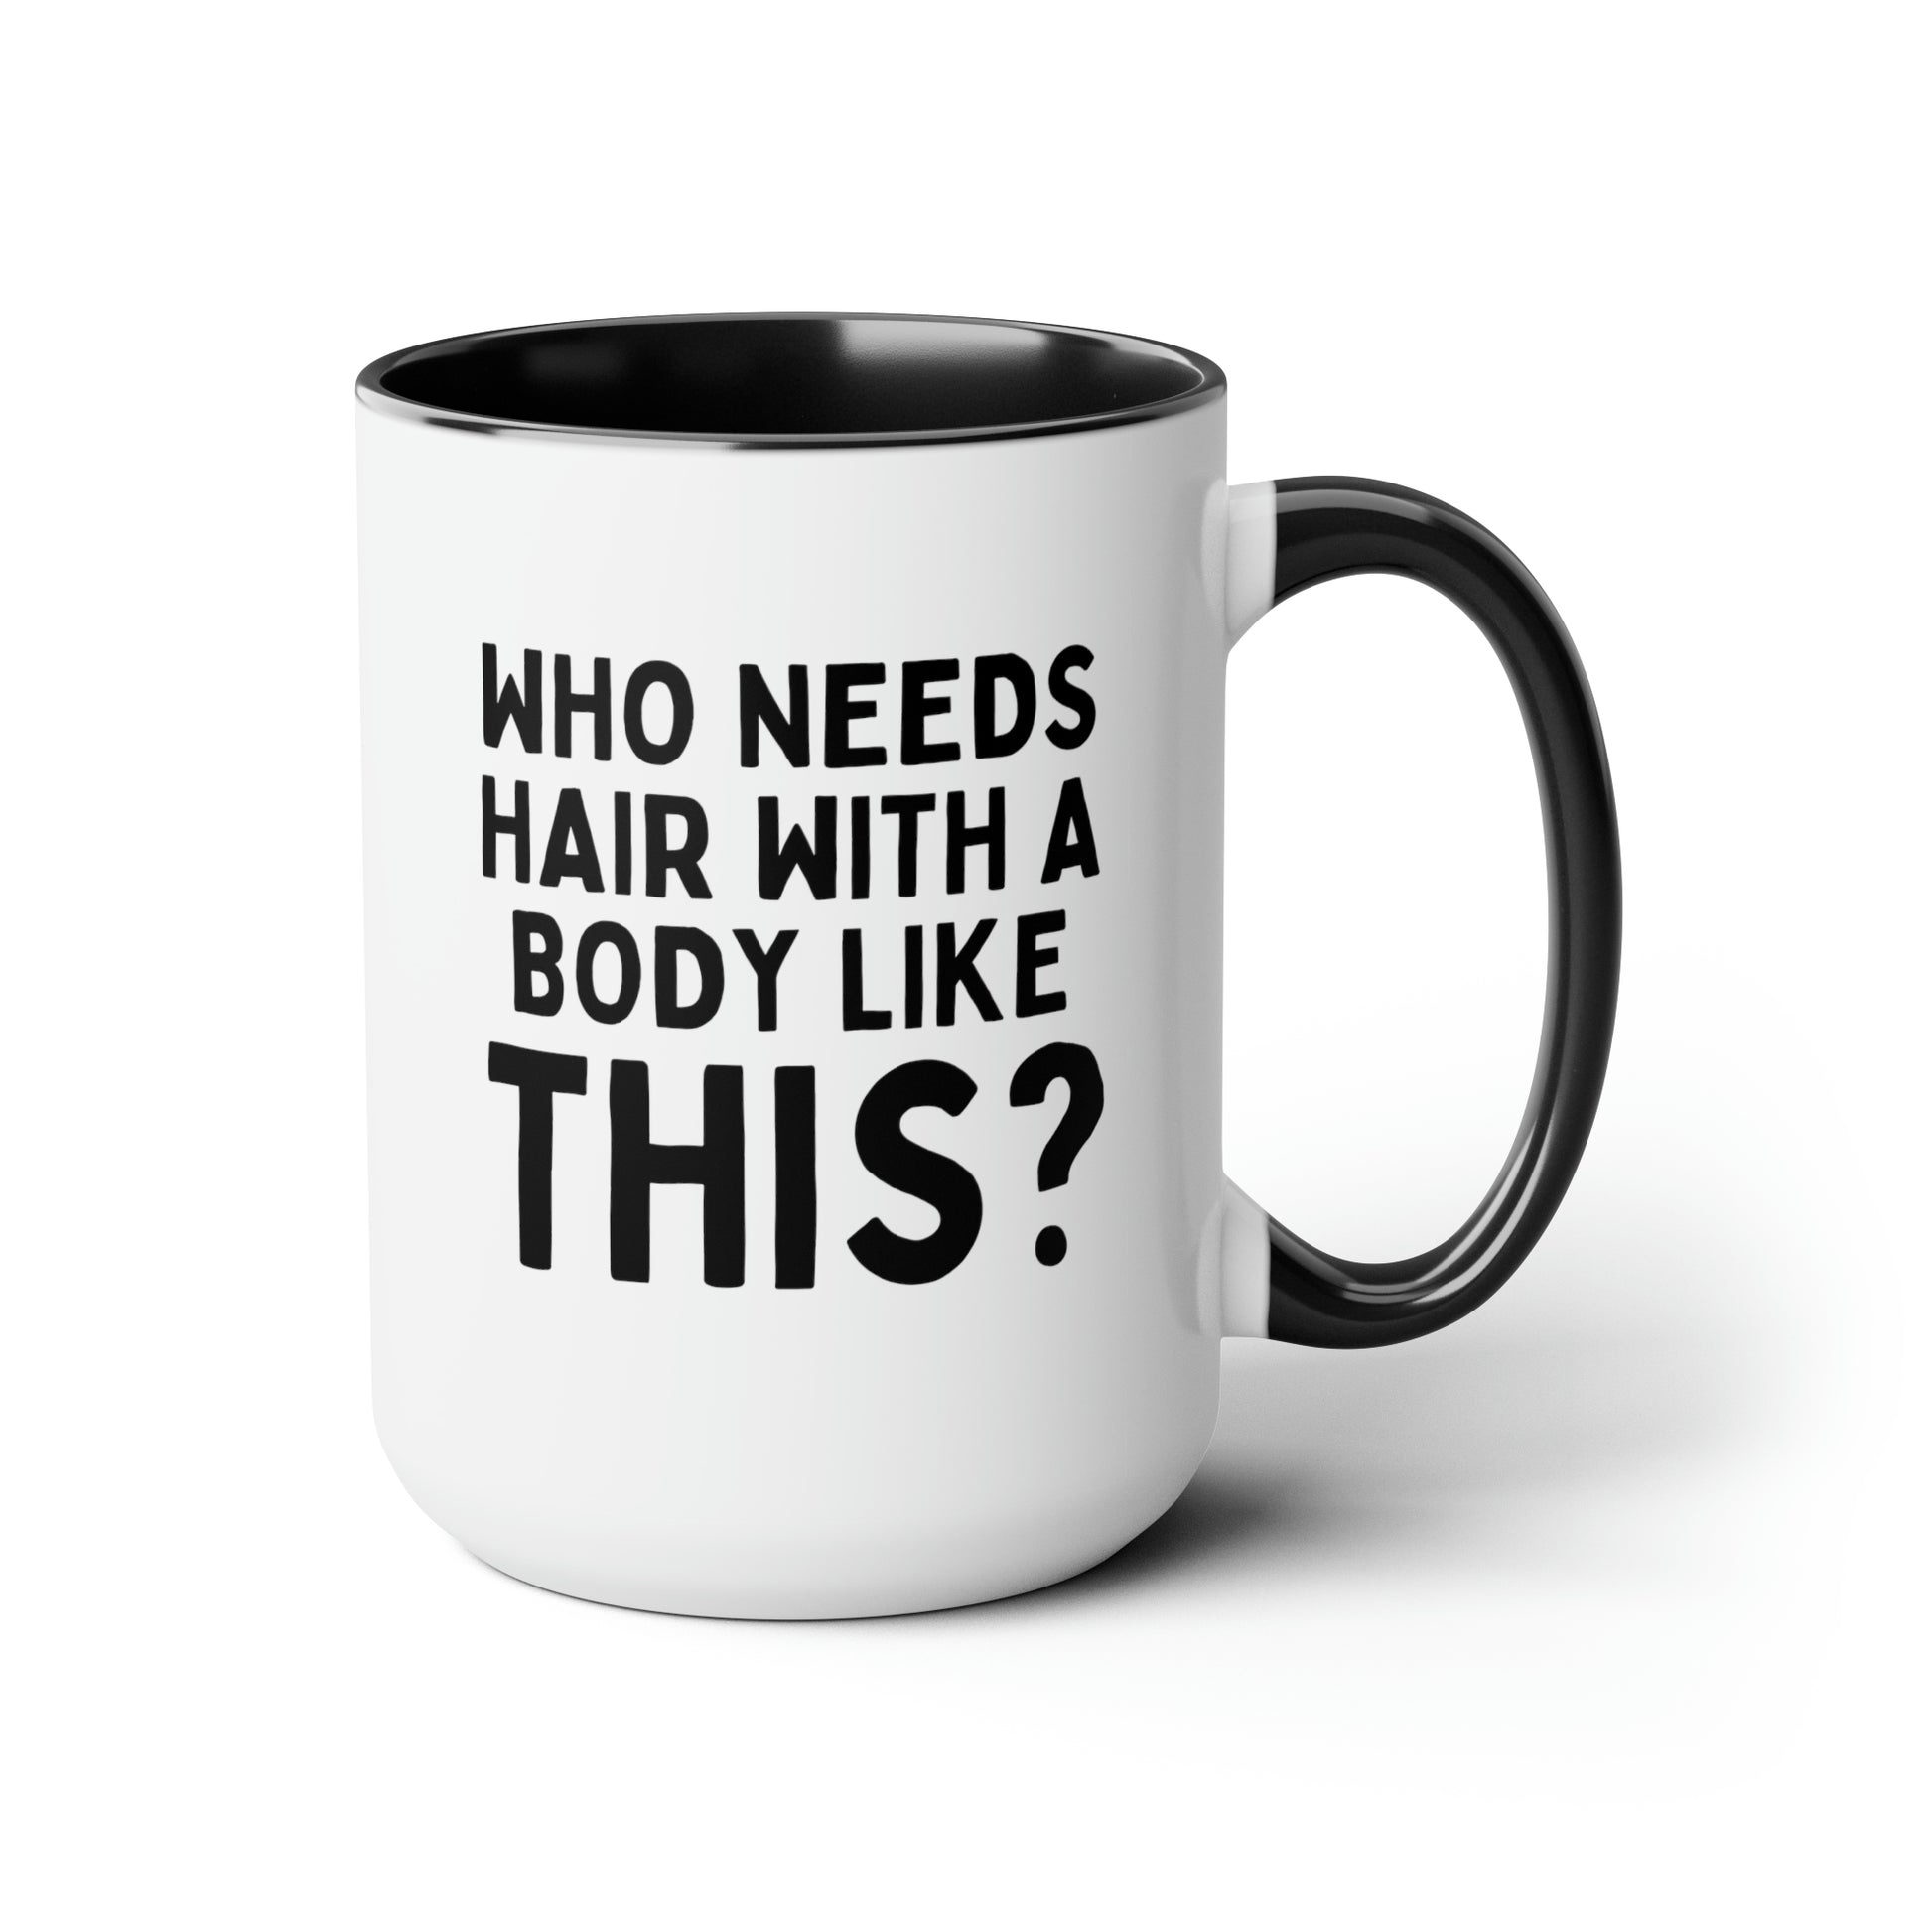 Who Needs Hair With a Body Like This 15oz white with black accent funny large coffee mug gift for bald men fathers day husband humor dad tea cup mens drinkware waveywares wavey wares wavywares wavy wares